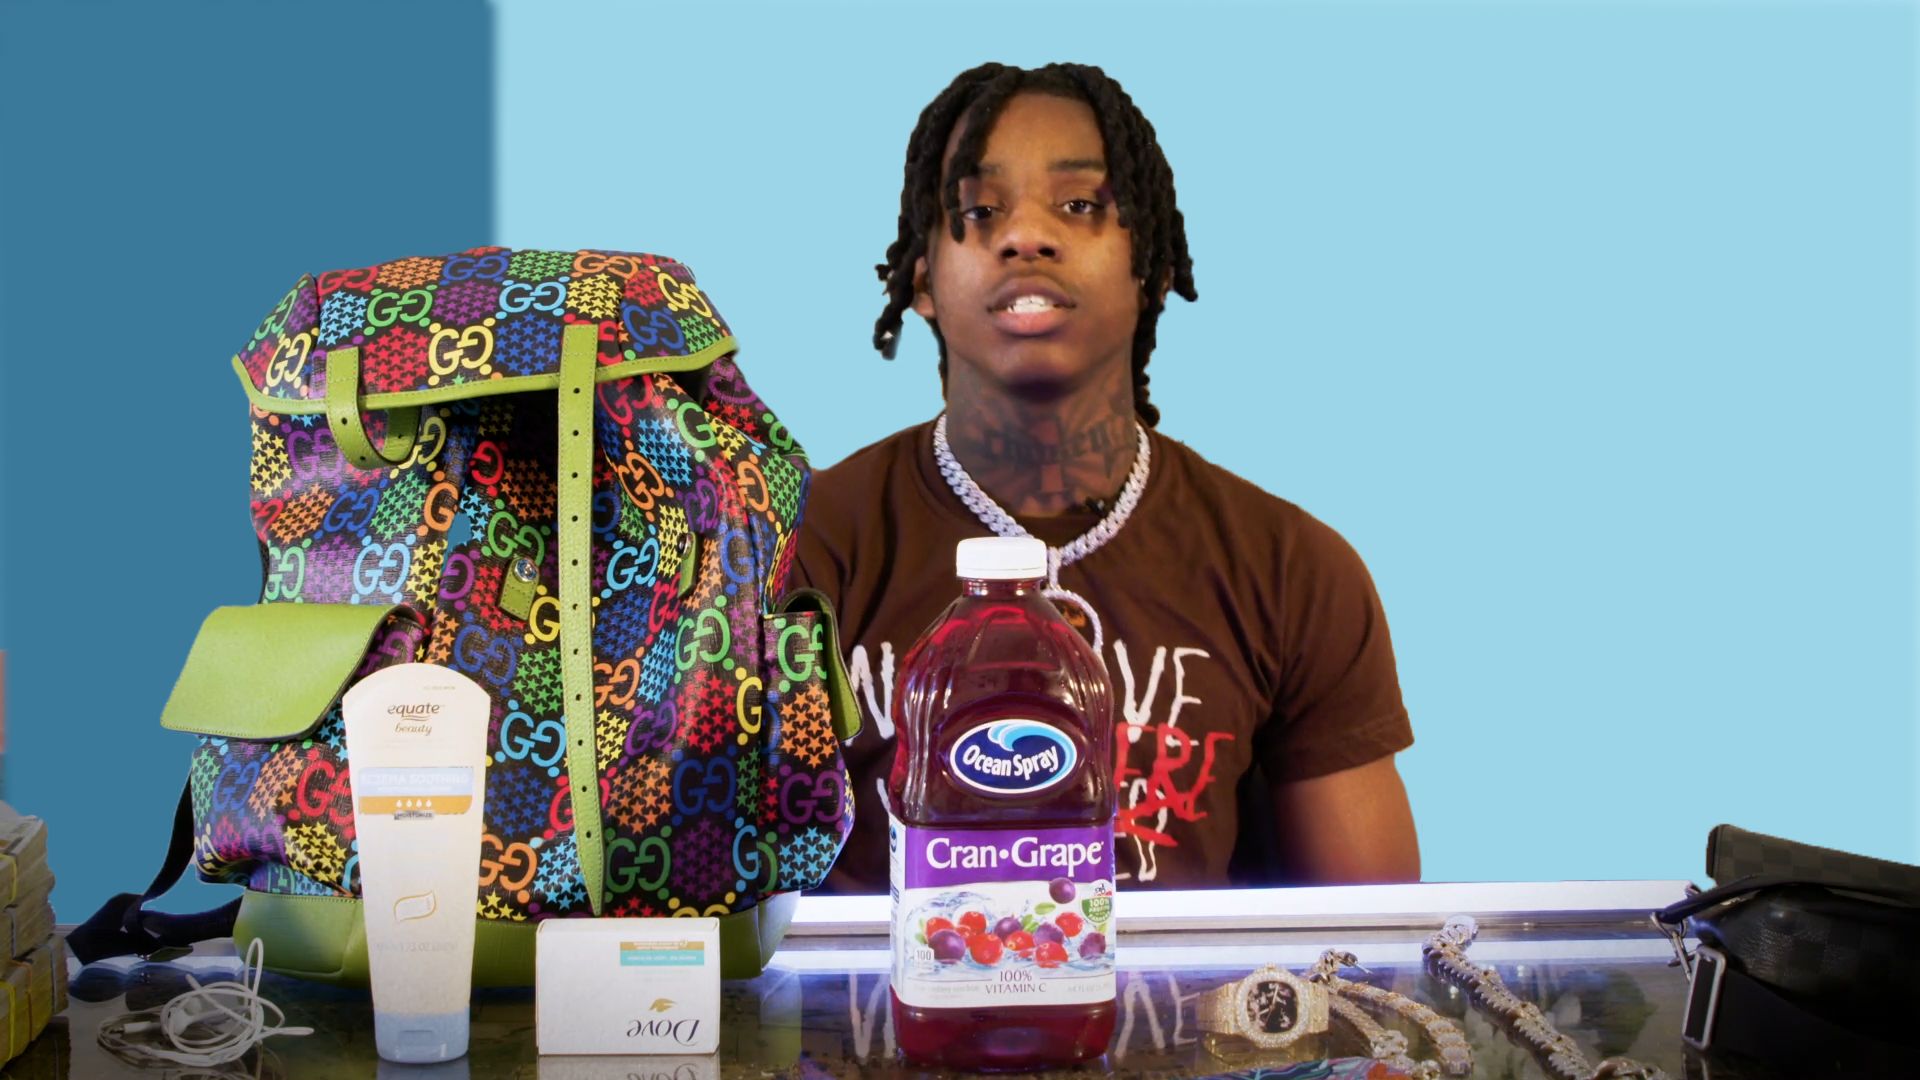 15 Things You Need to Know About Polo G